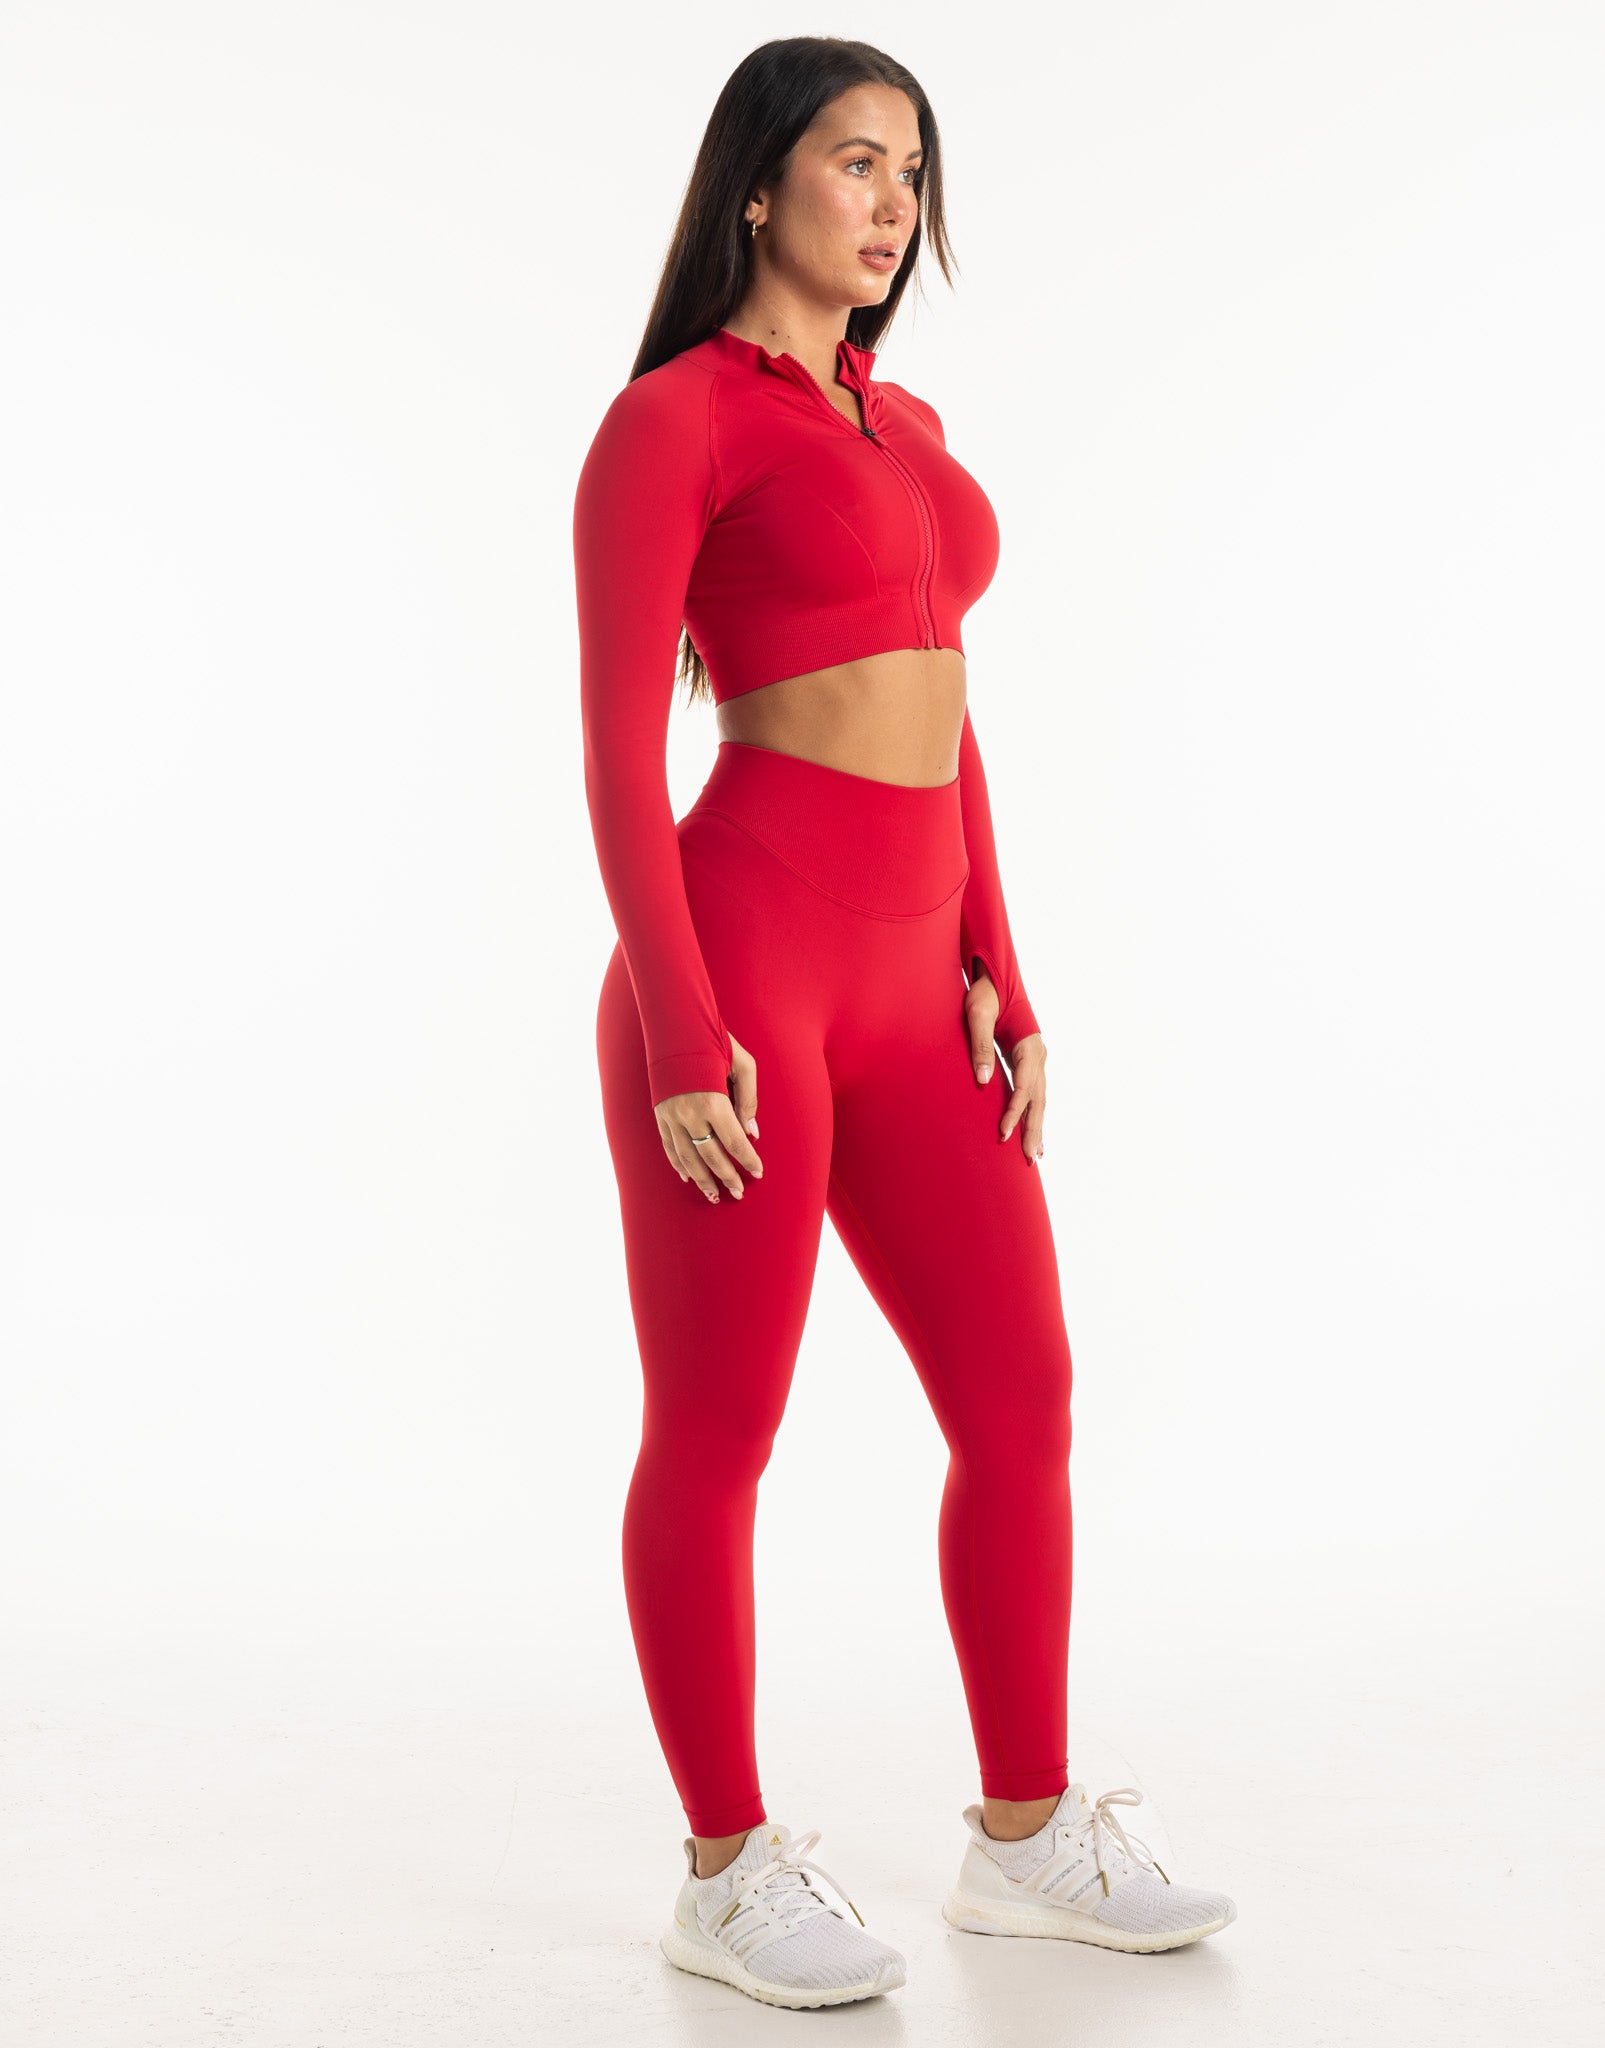 League Cropped Zip-Up - Magenta Red